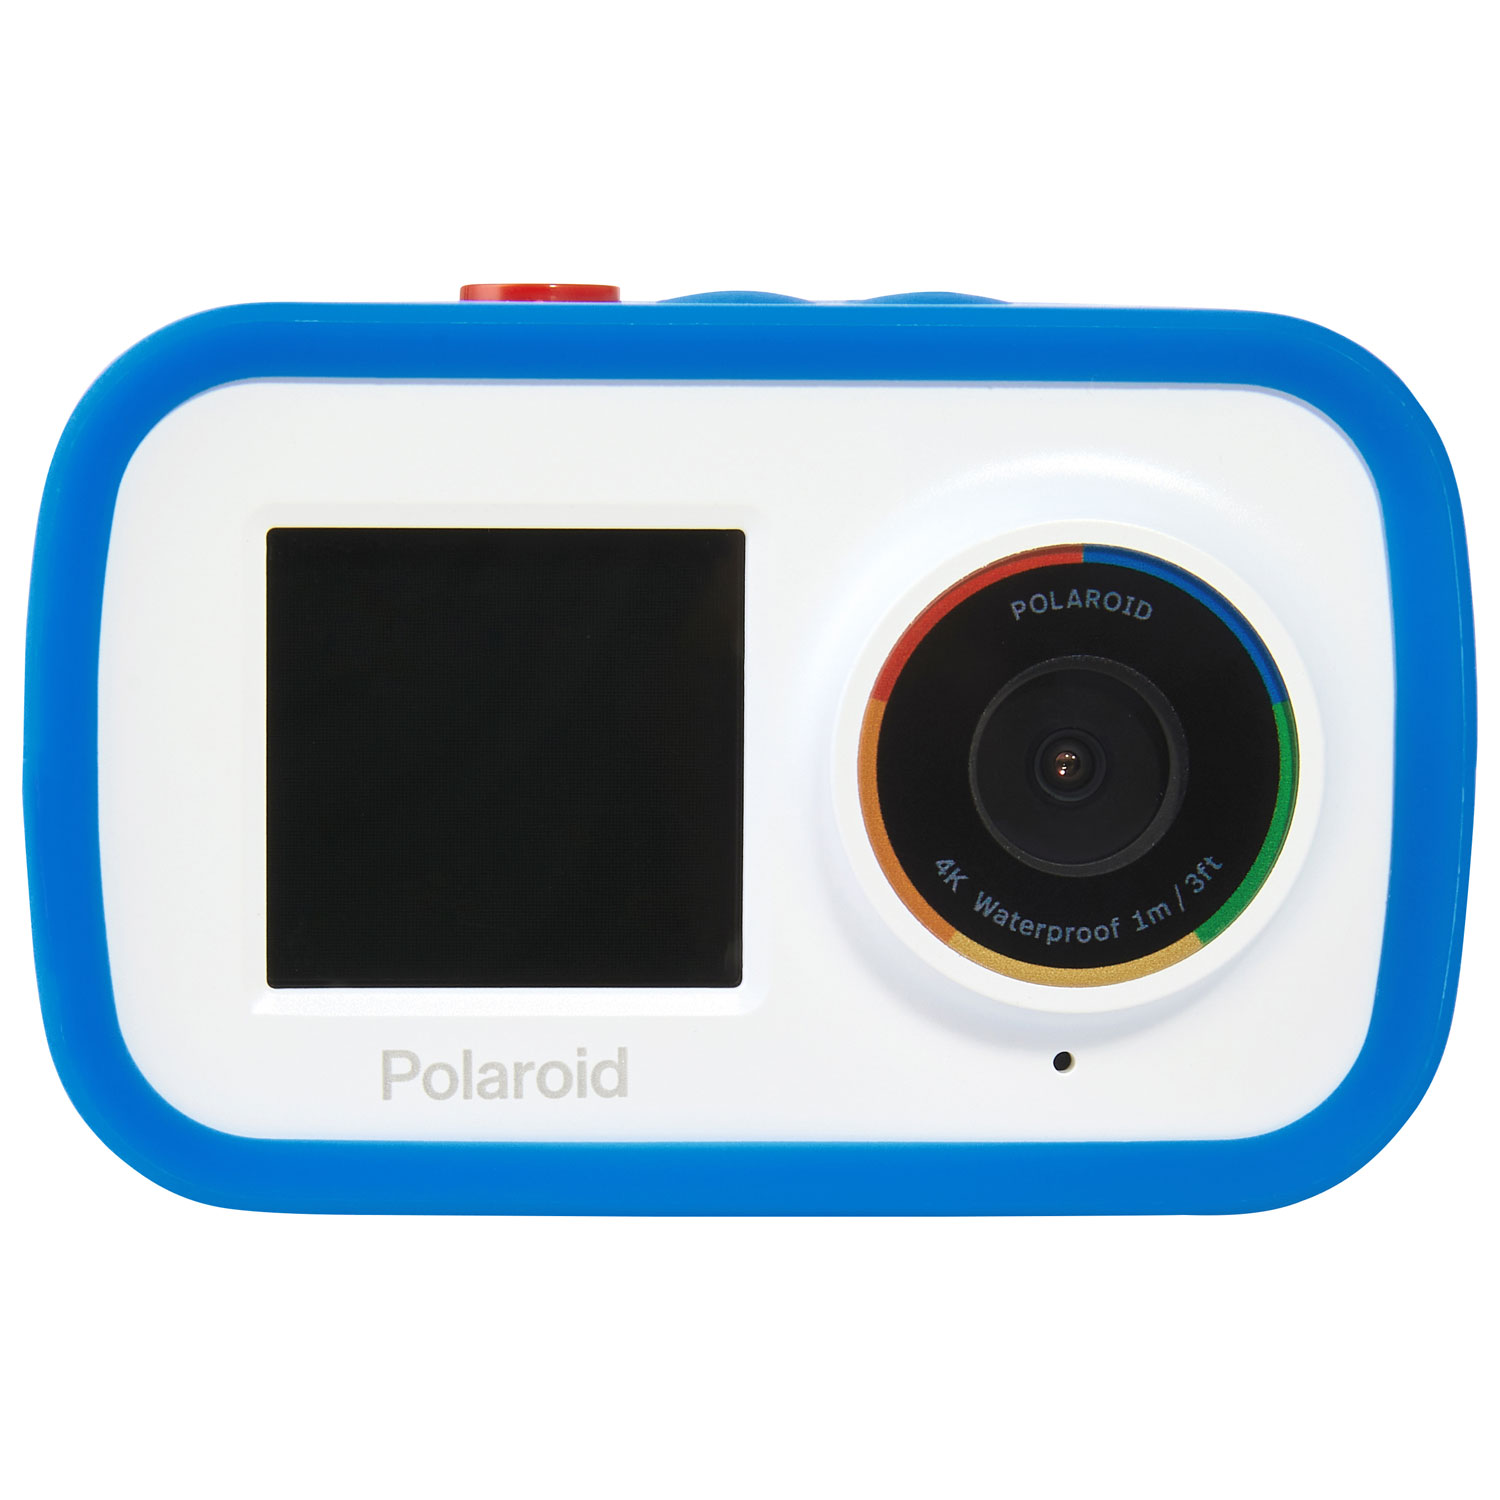 Polaroid ID922 Waterproof 4K UHD Action Camera Kit - Blue/White - Only at Best Buy